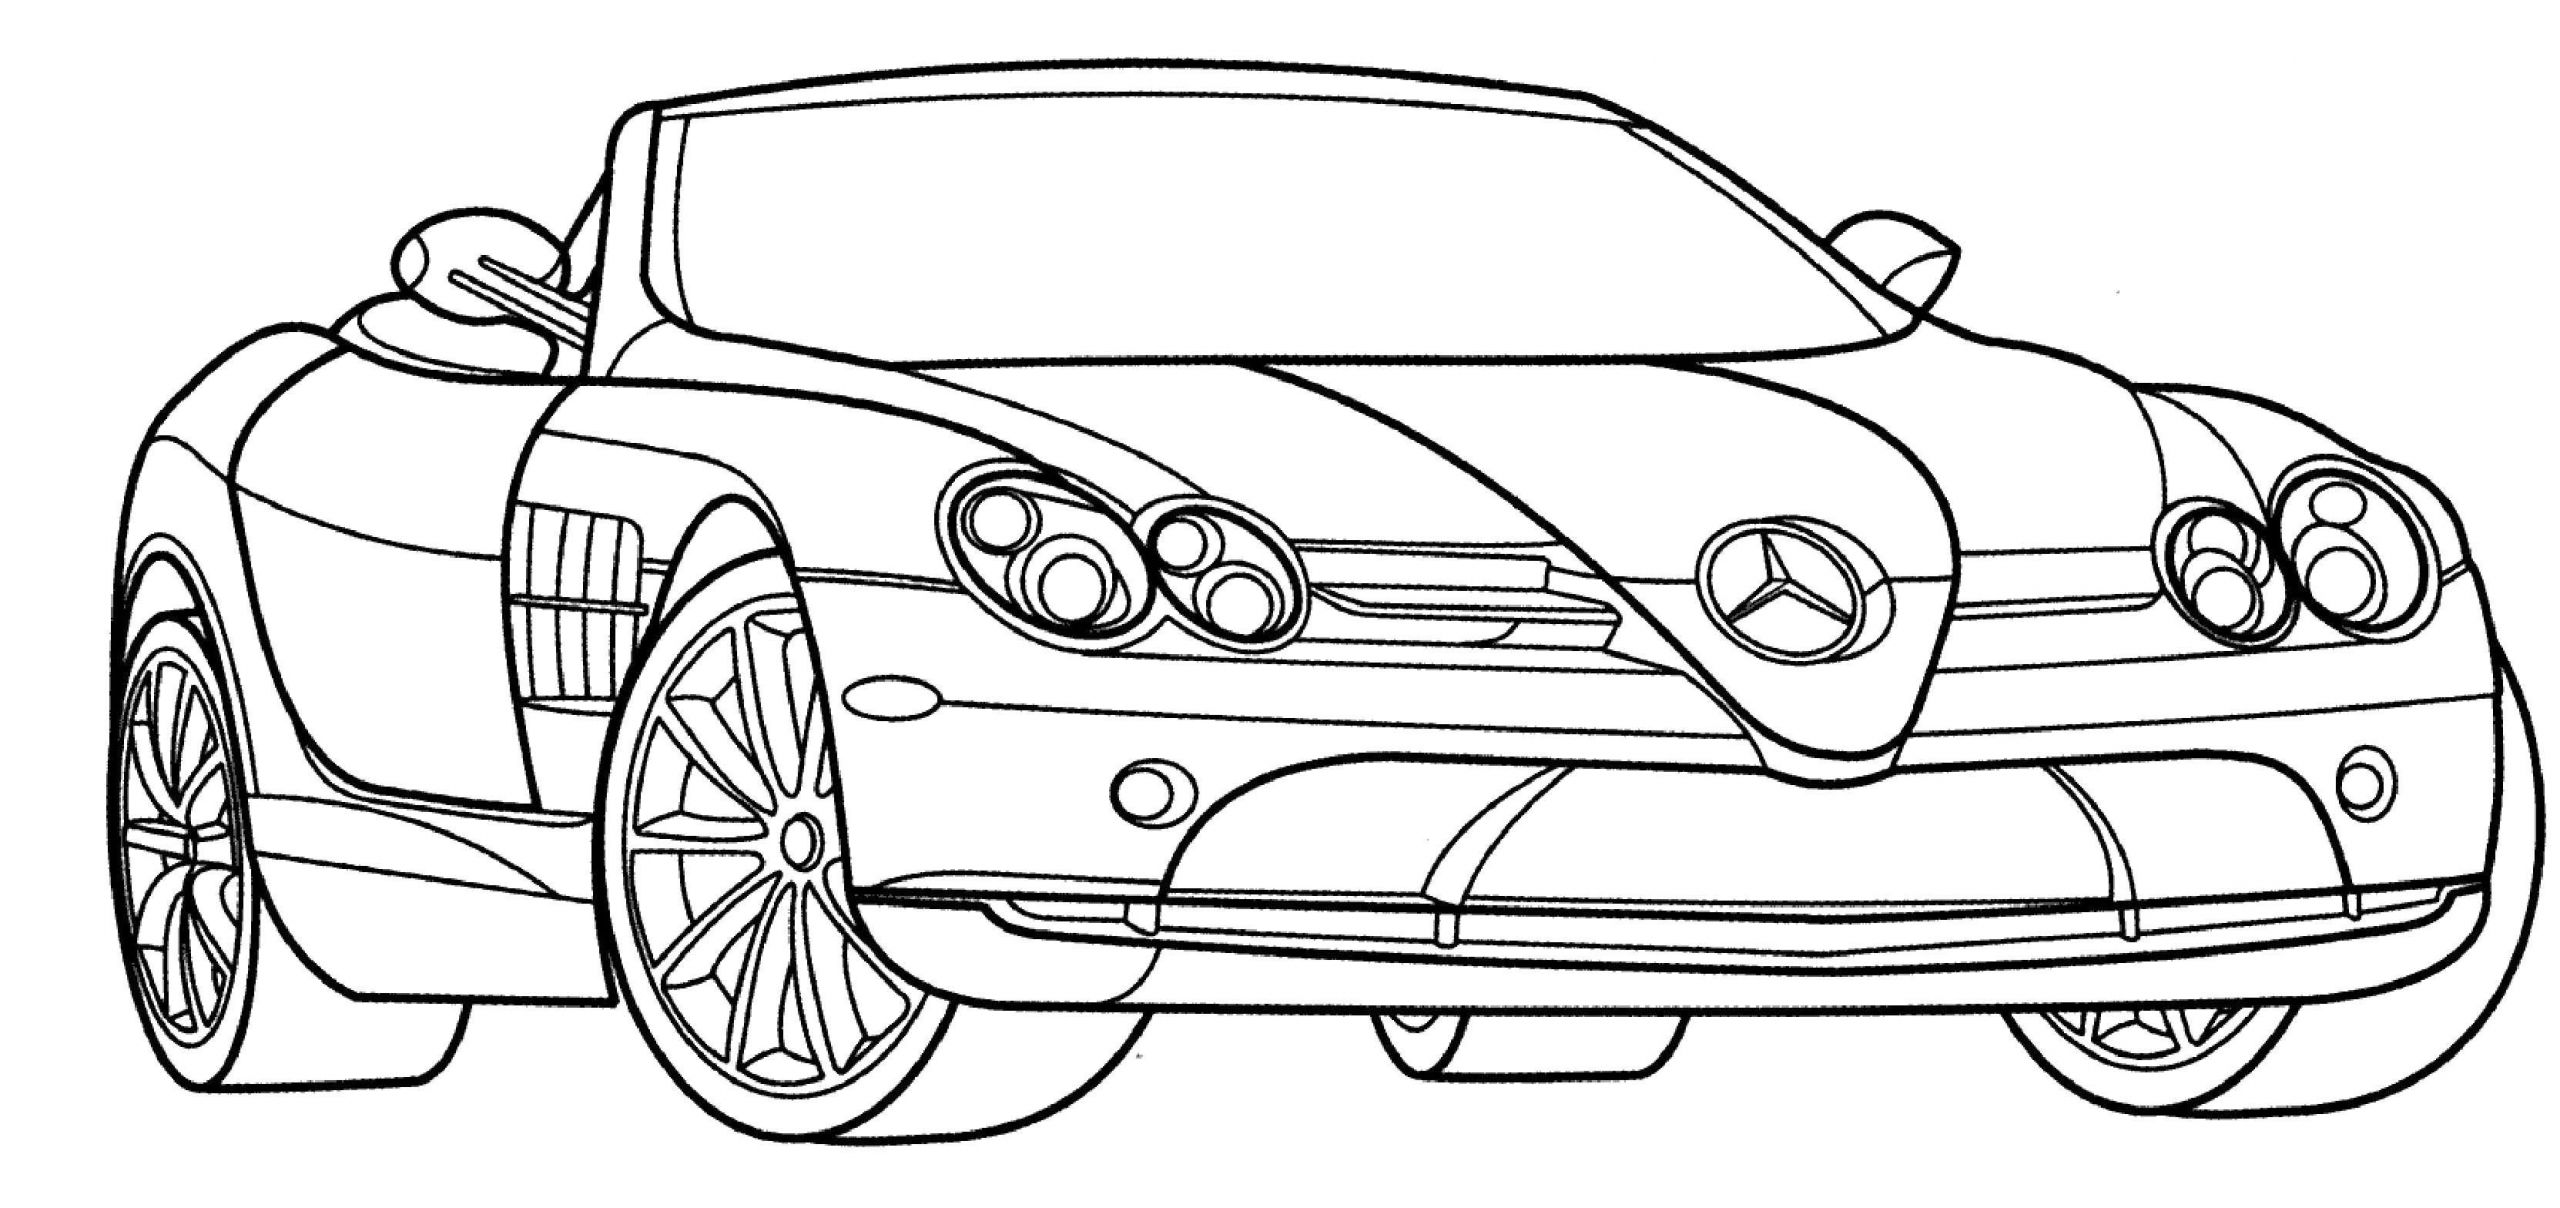 Car Coloring Books For Adults
 Super Car Coloring Pages Resume Format Download Pdf